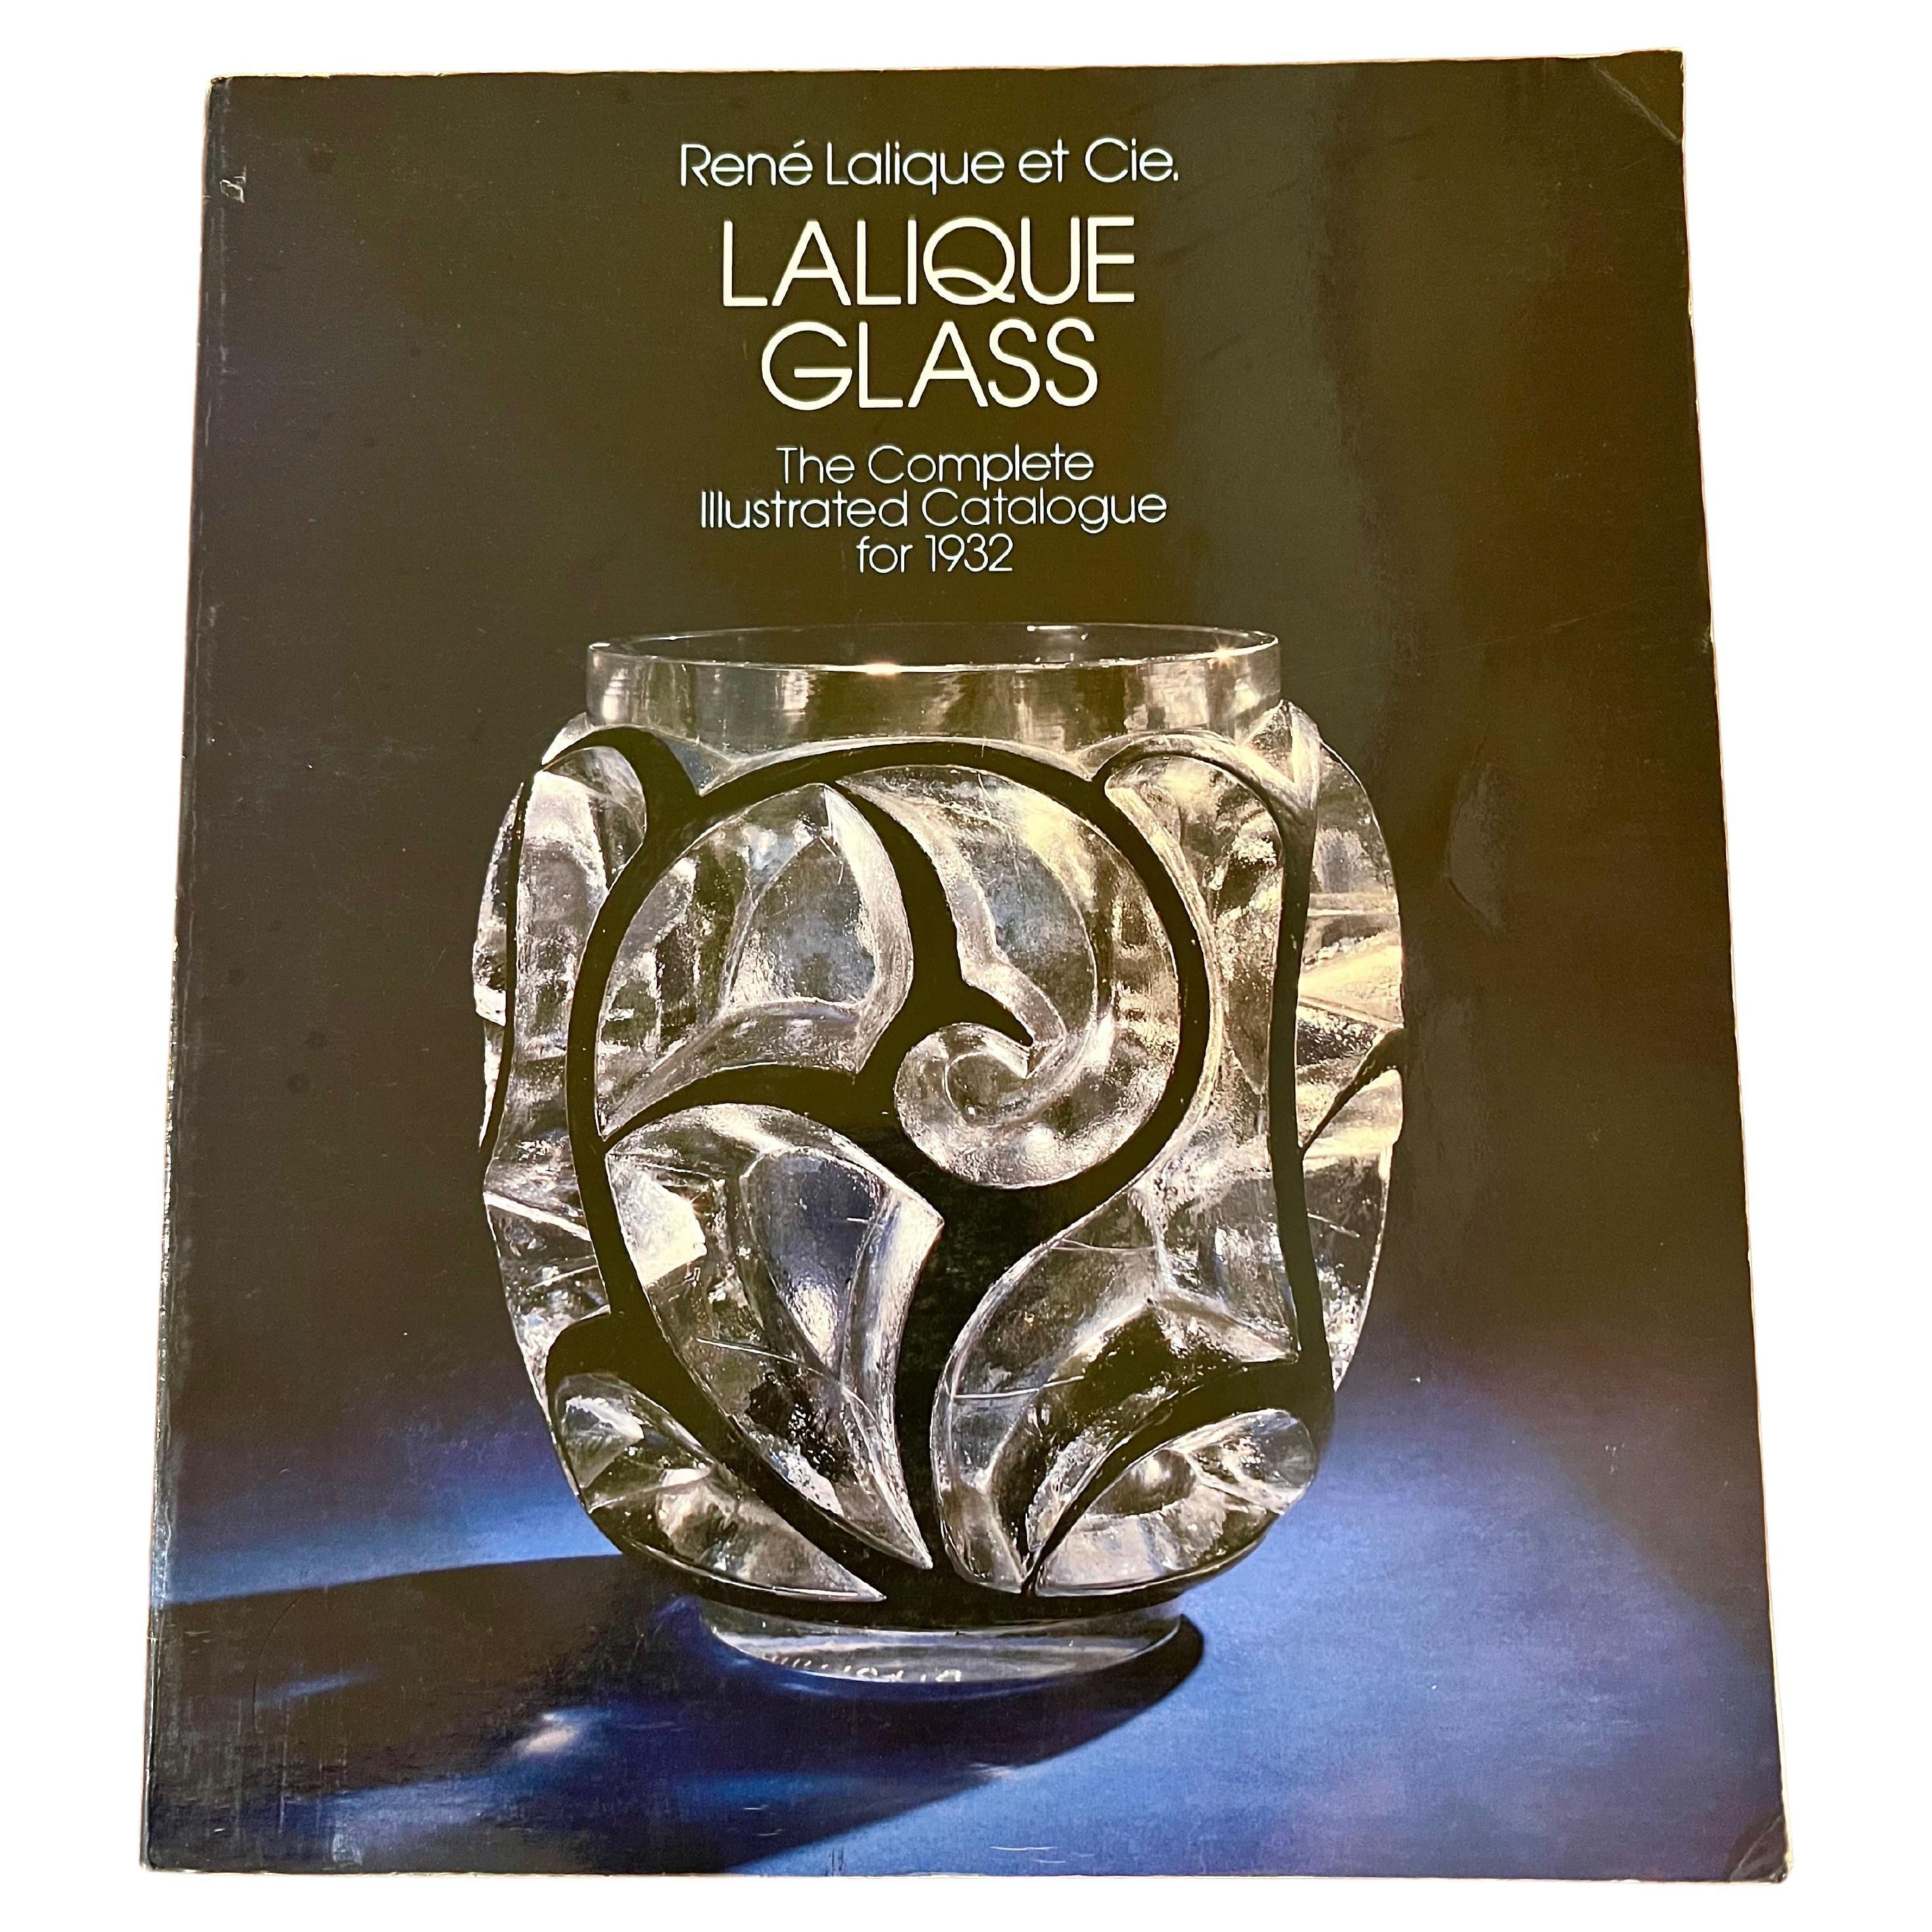 1981 Lalique Glass Ilustrated Catalog Book by Dover Publications